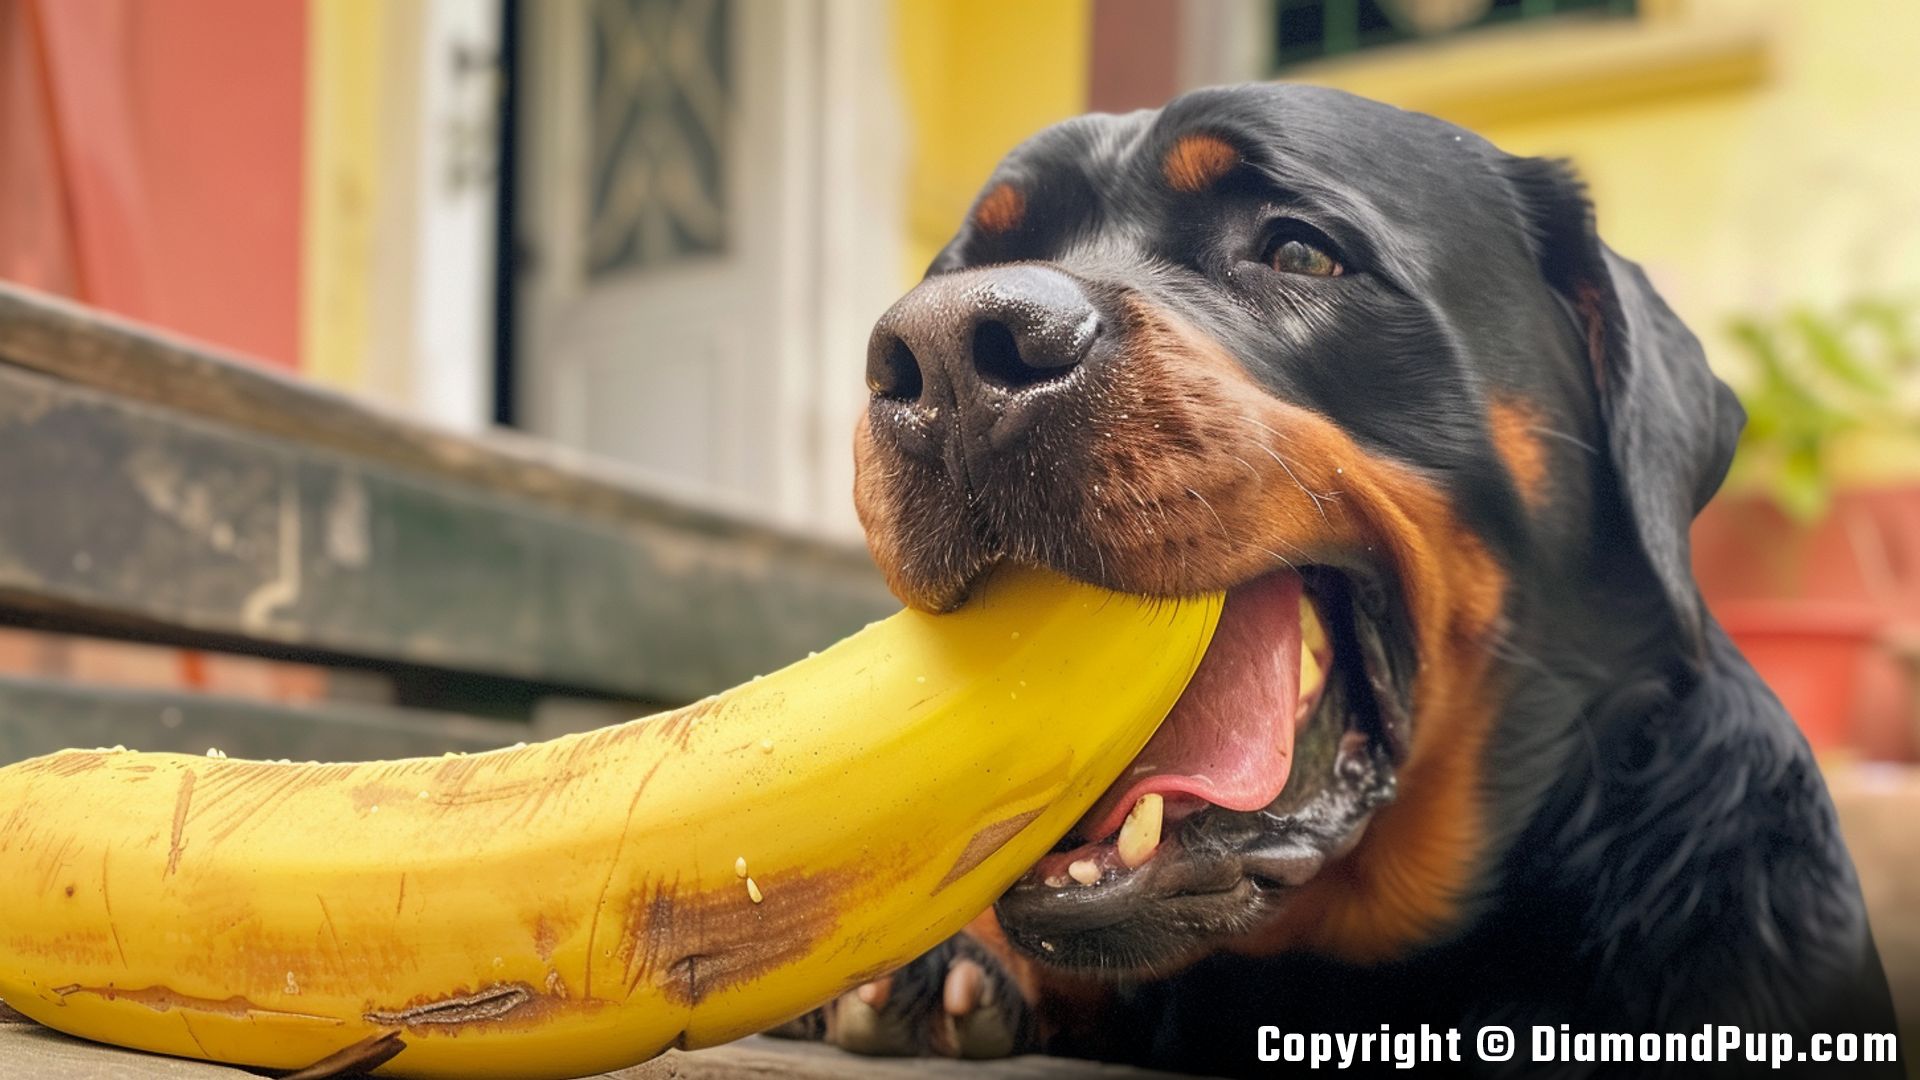 Photograph of an Adorable Rottweiler Snacking on Banana